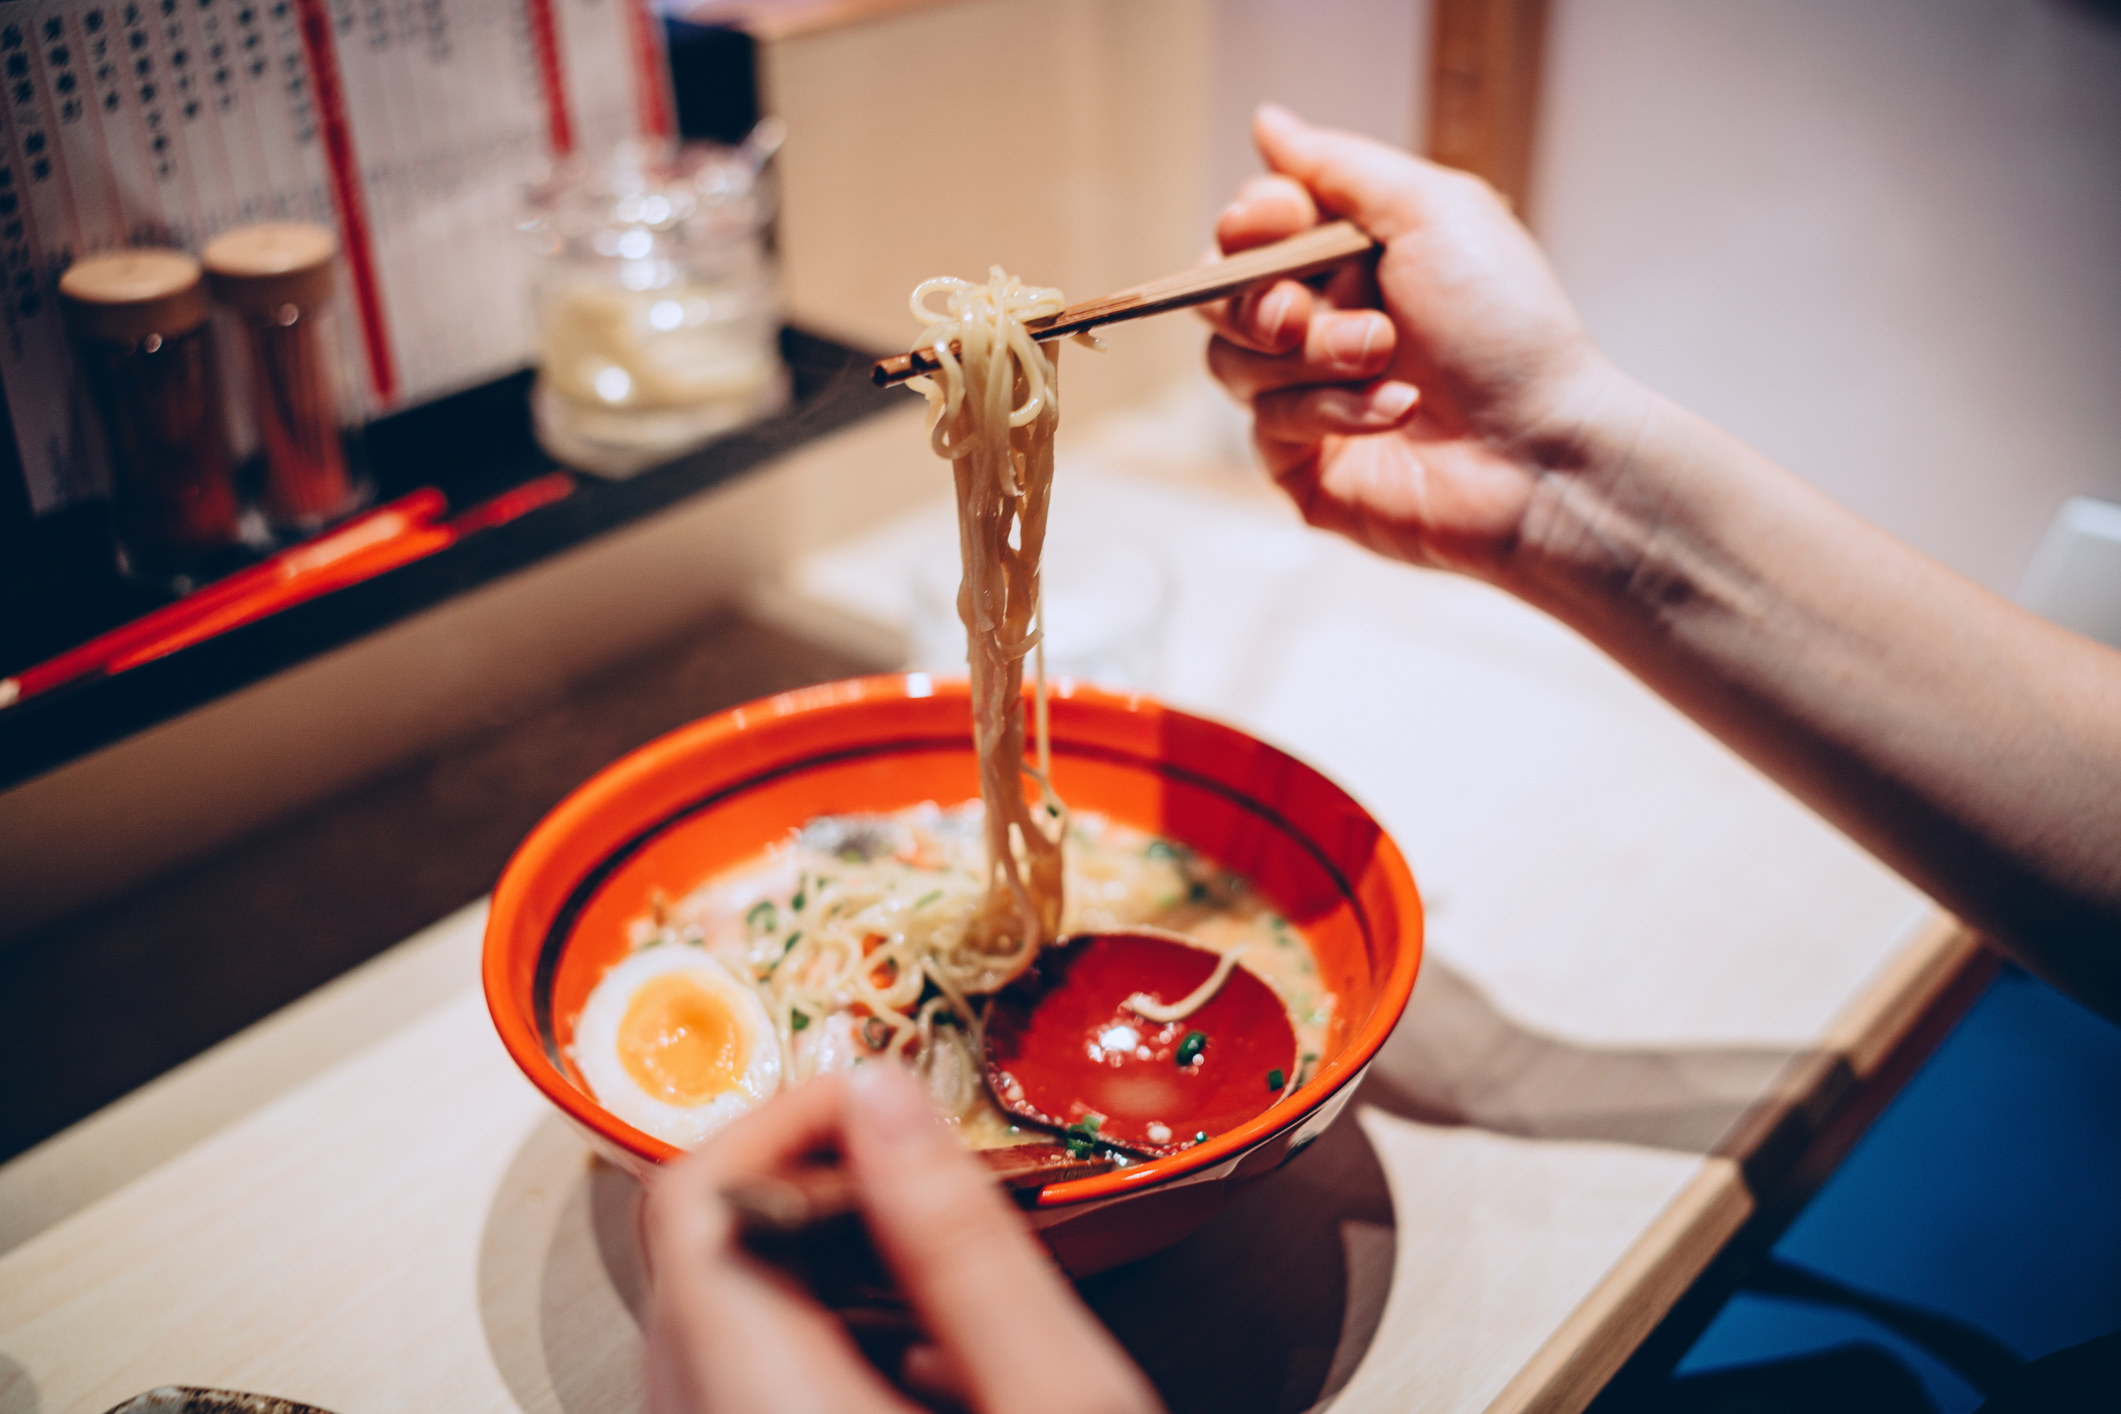 A person eating a bowl of ramen